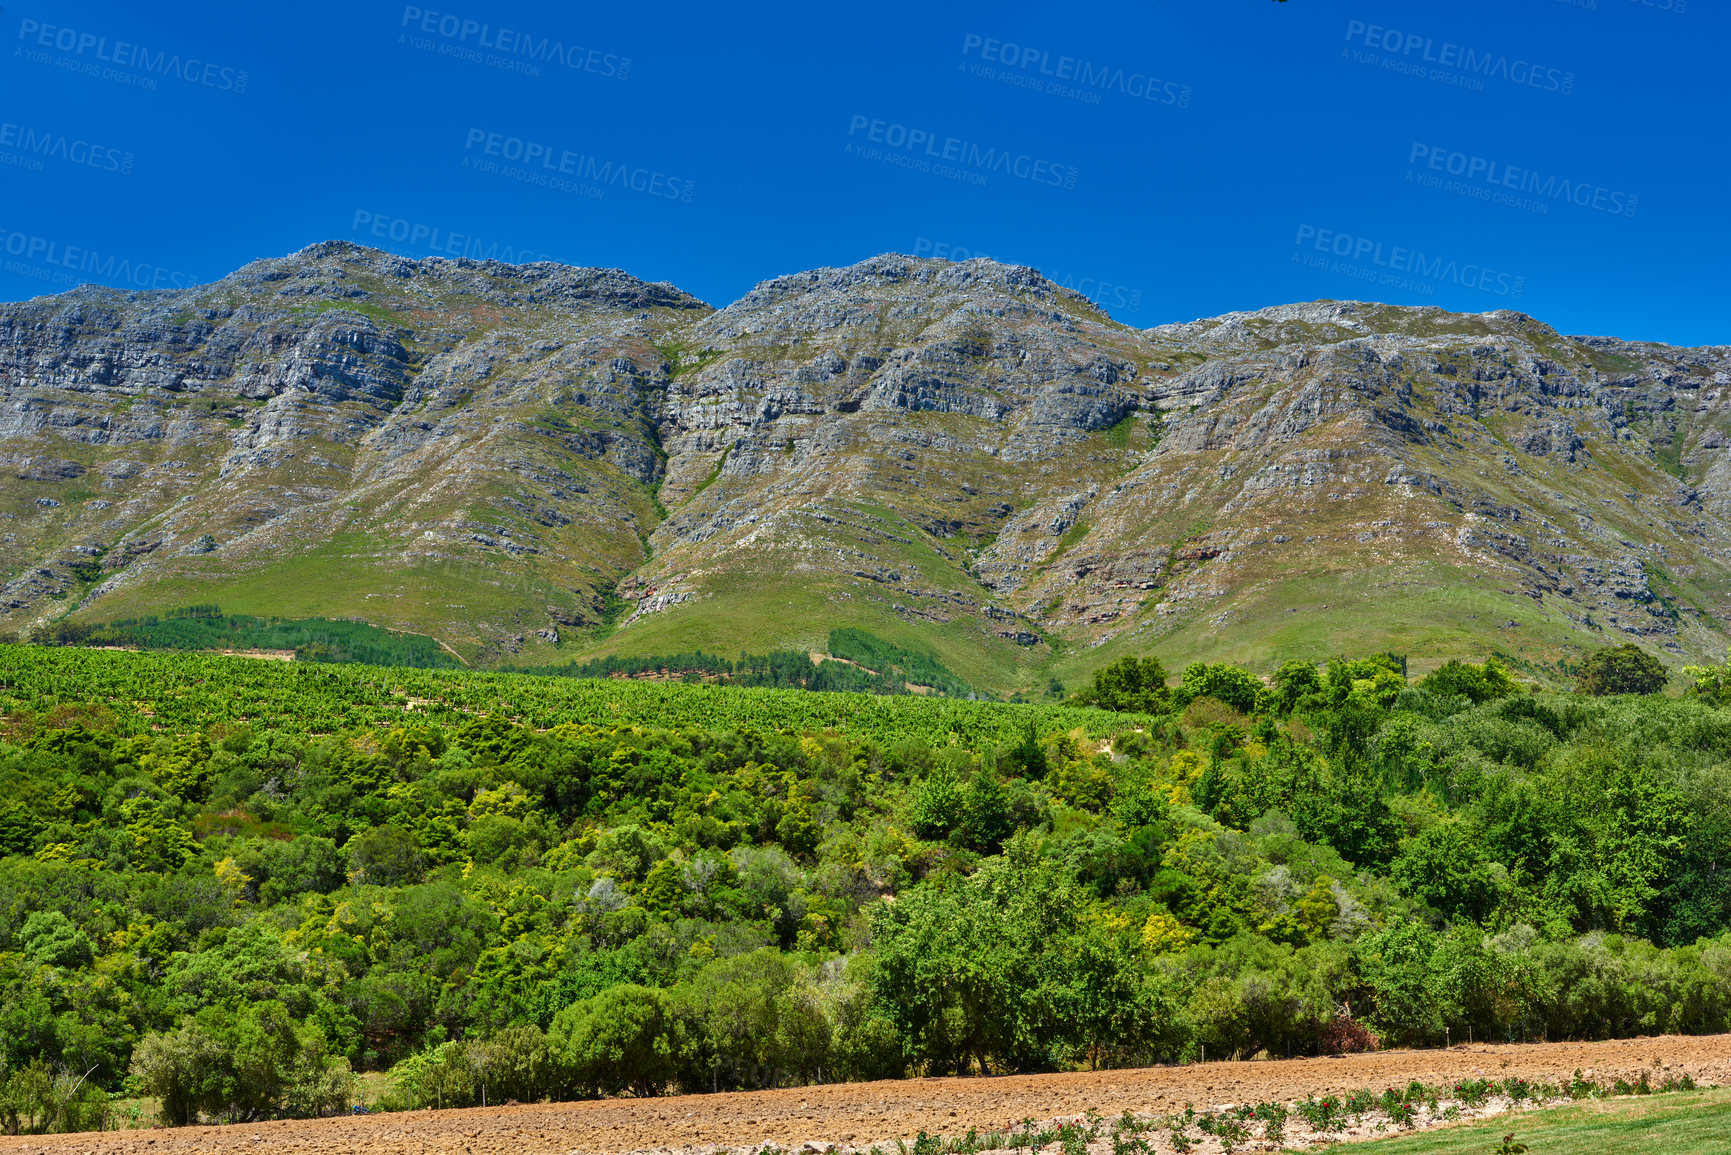 Buy stock photo Mountain range with lush greenery near tilled farmland in the vineyards of Stellenbosch, South Africa. Vibrant green nature scene of bushes with a breathtaking bright blue sky in rural green landscape